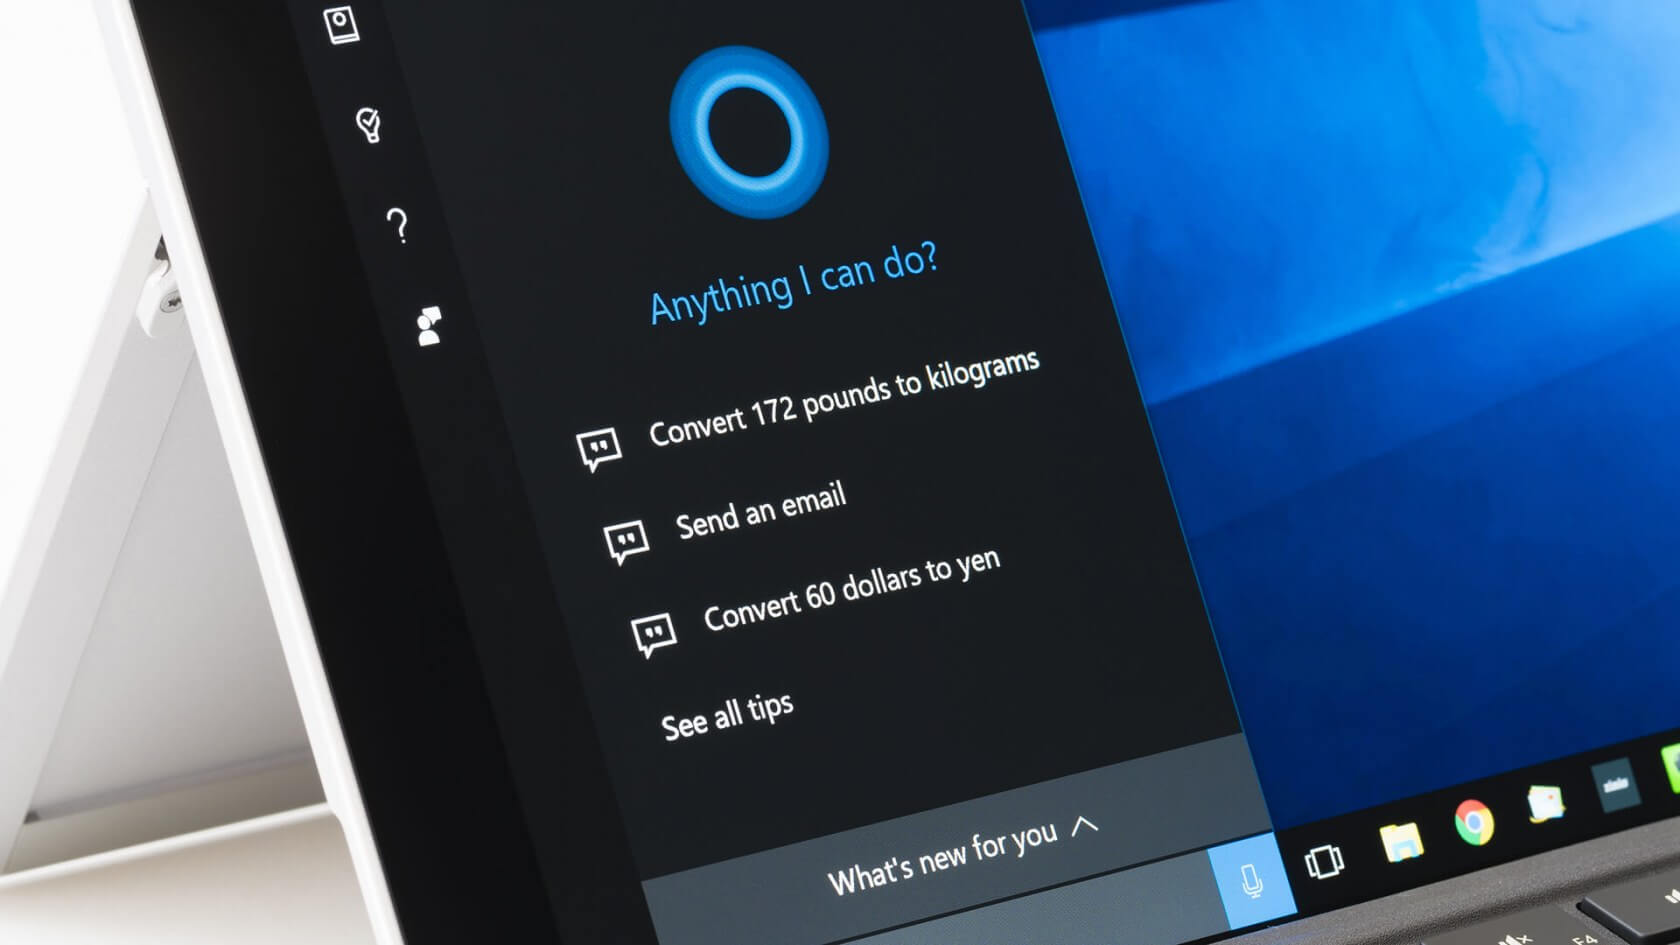 Microsoft will continue to let humans transcribe Skype Translations and Cortana conversations